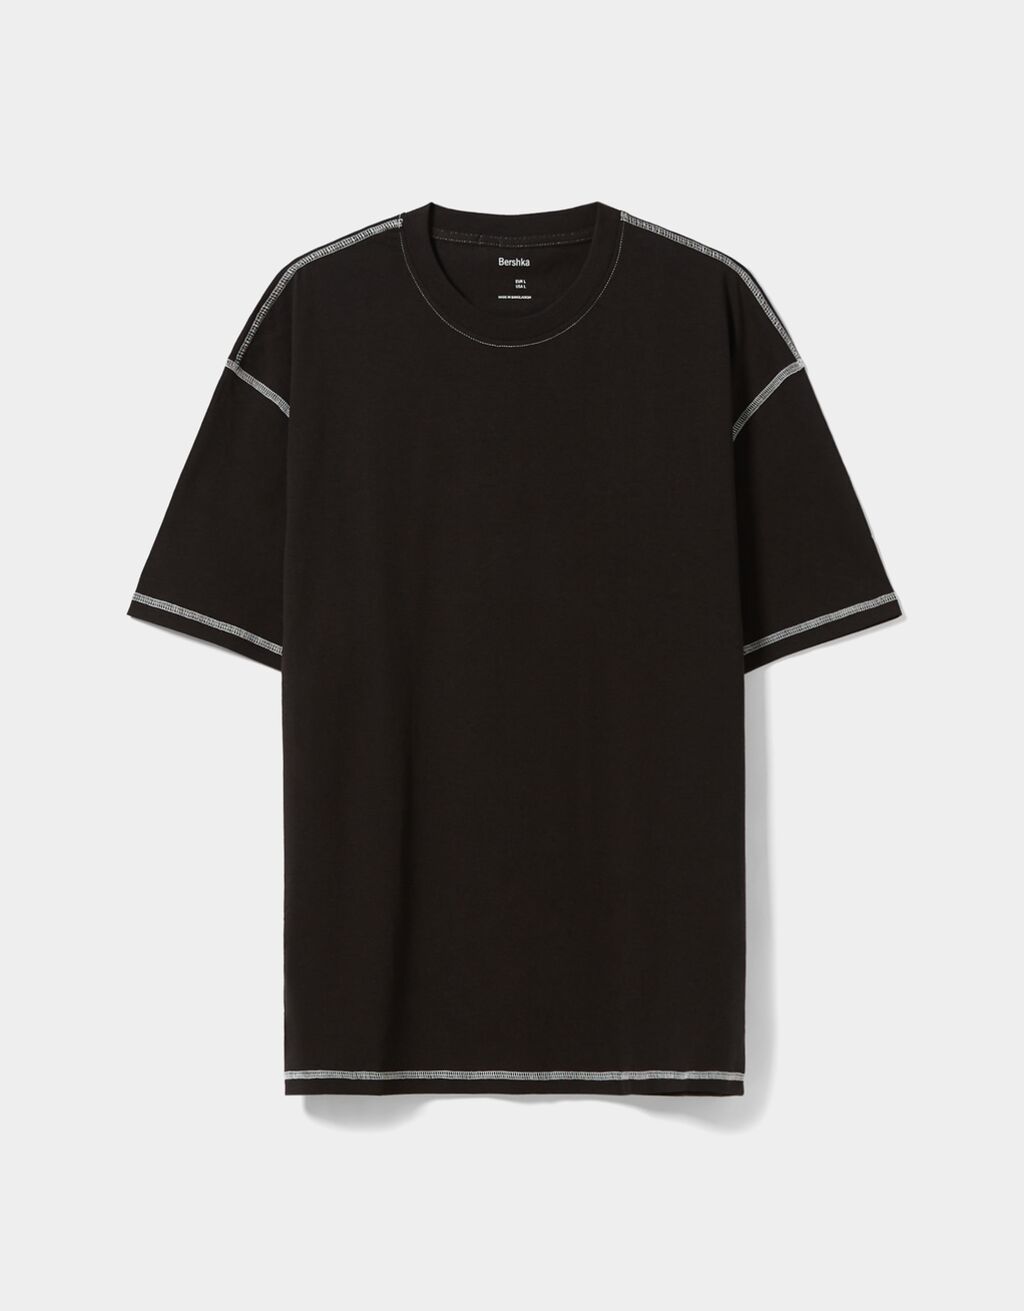 Regular fit short sleeve T-shirt with contrast thread